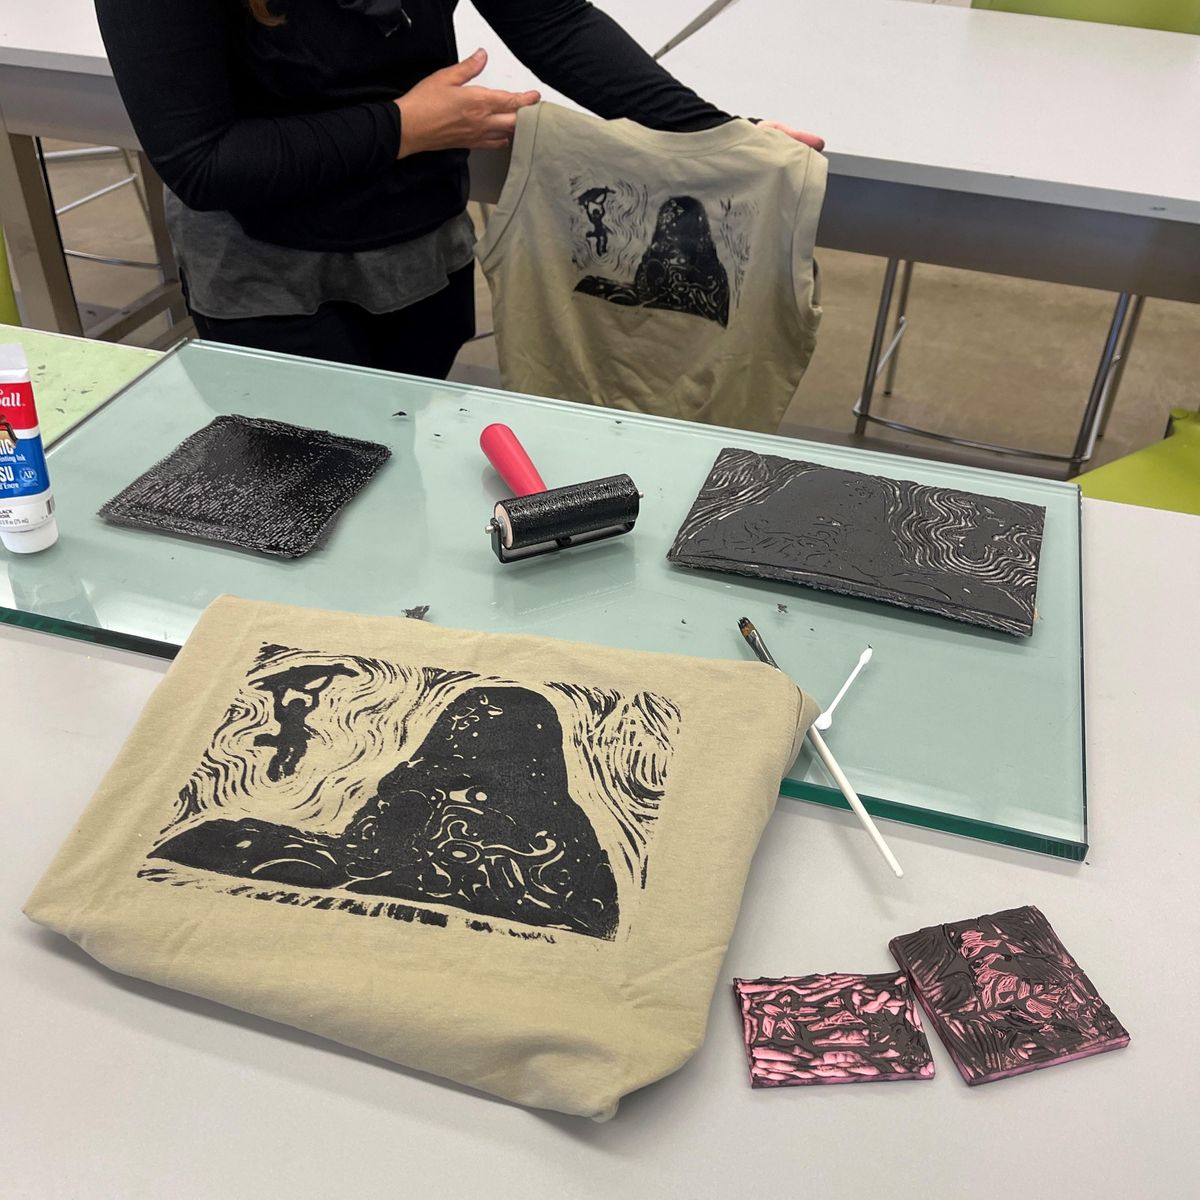 Class 59. Block Printing on T-shirts and Textiles | Christopher Lahti